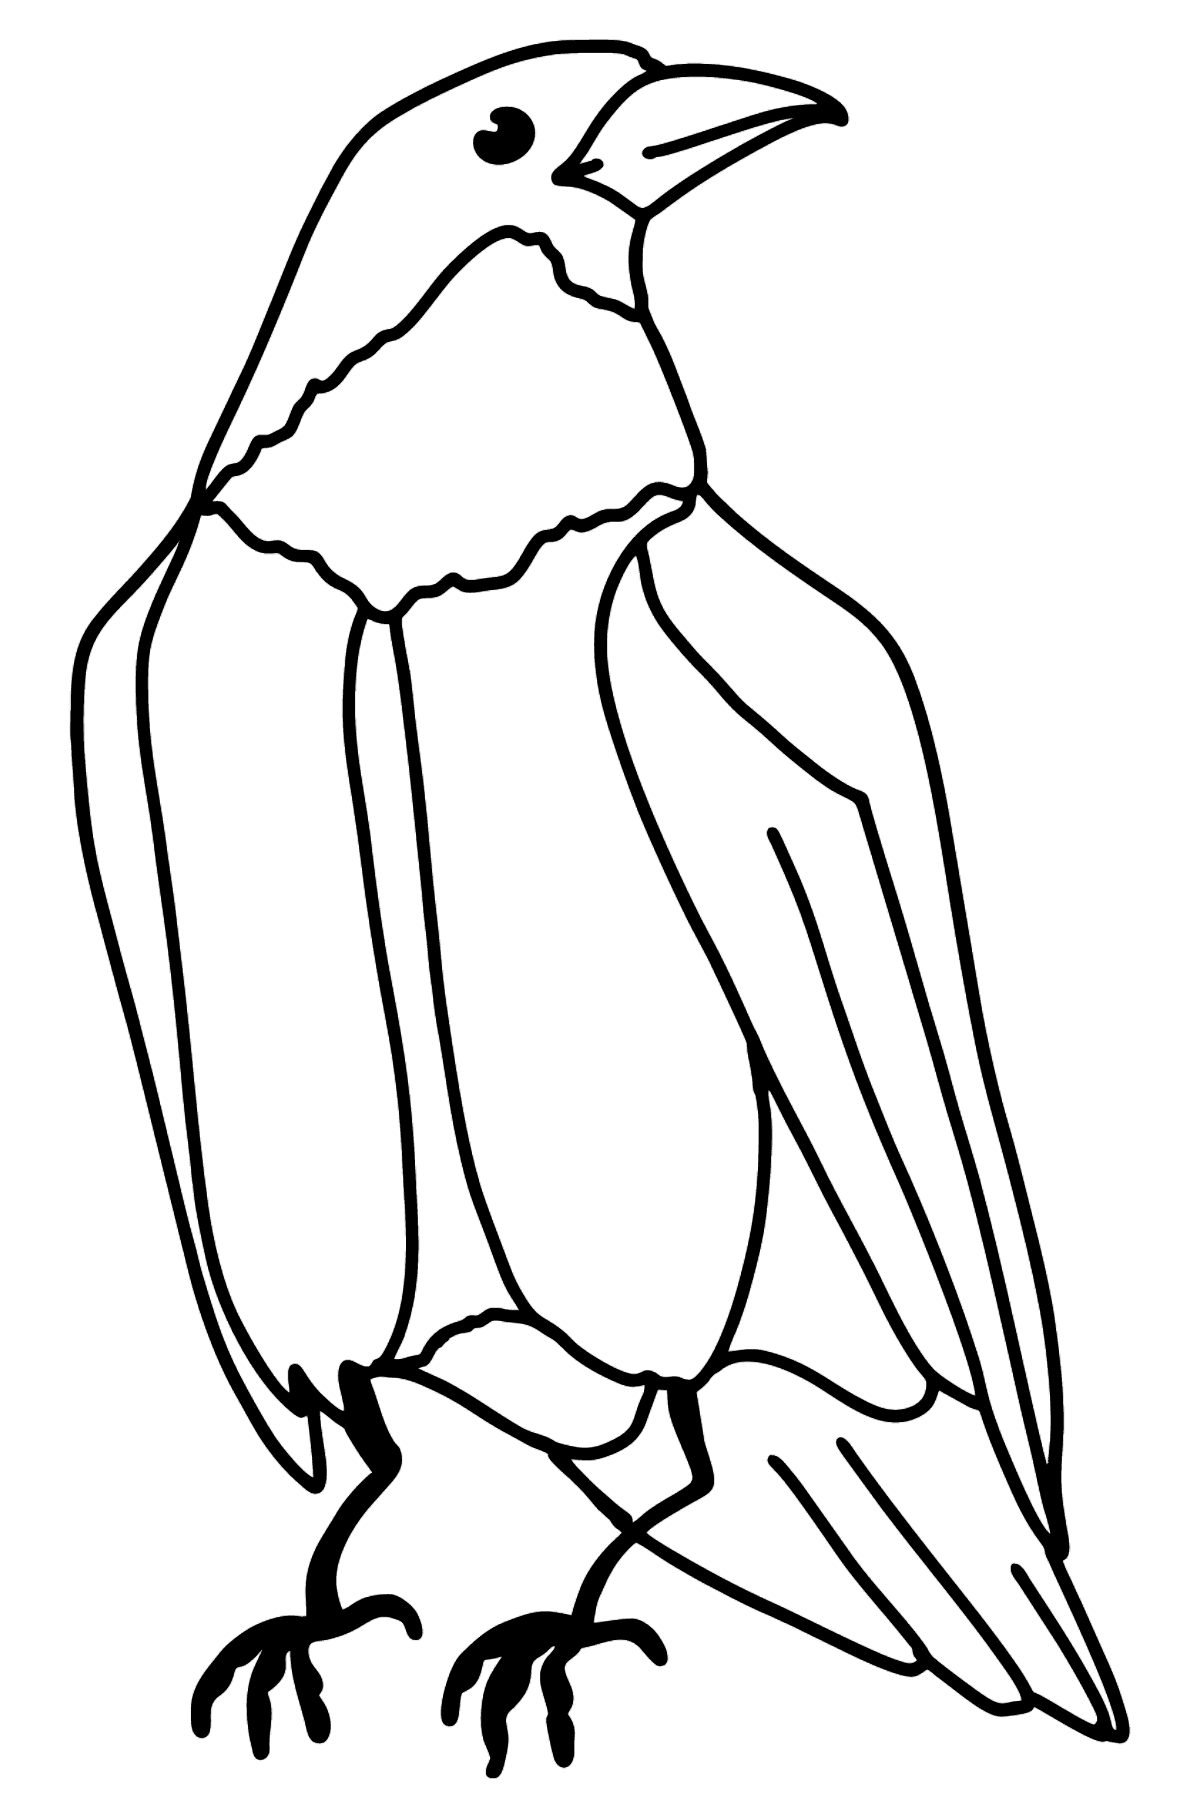 Clever Crow coloring page - Coloring Pages for Kids